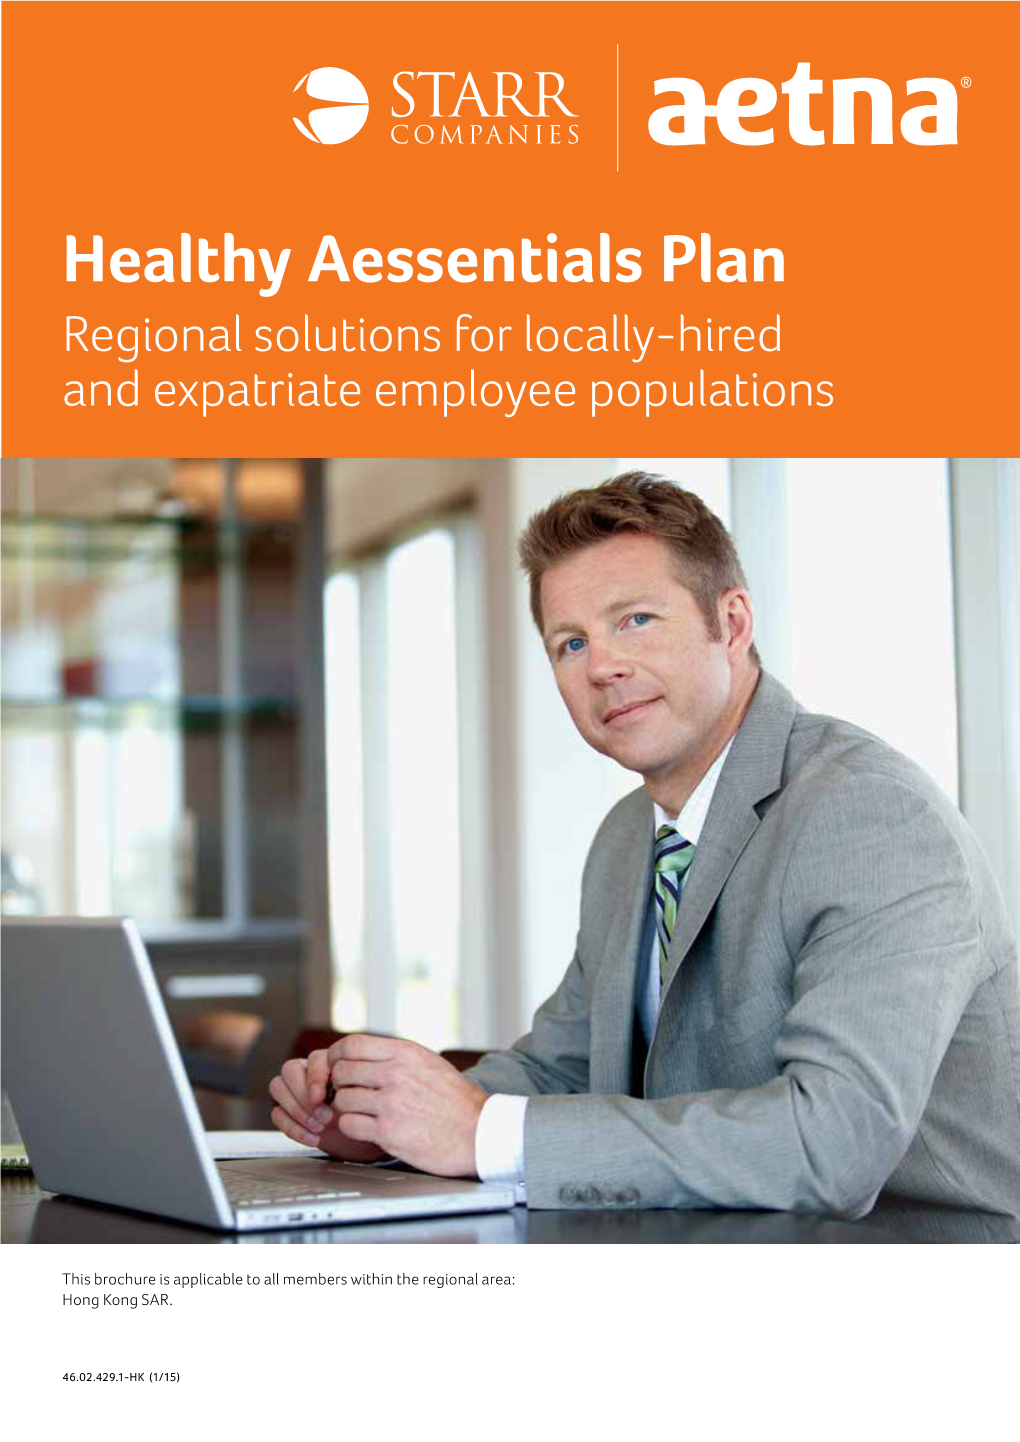 Healthy Aessentials Plan Regional Solutions for Locally-Hired and Expatriate Employee Populations